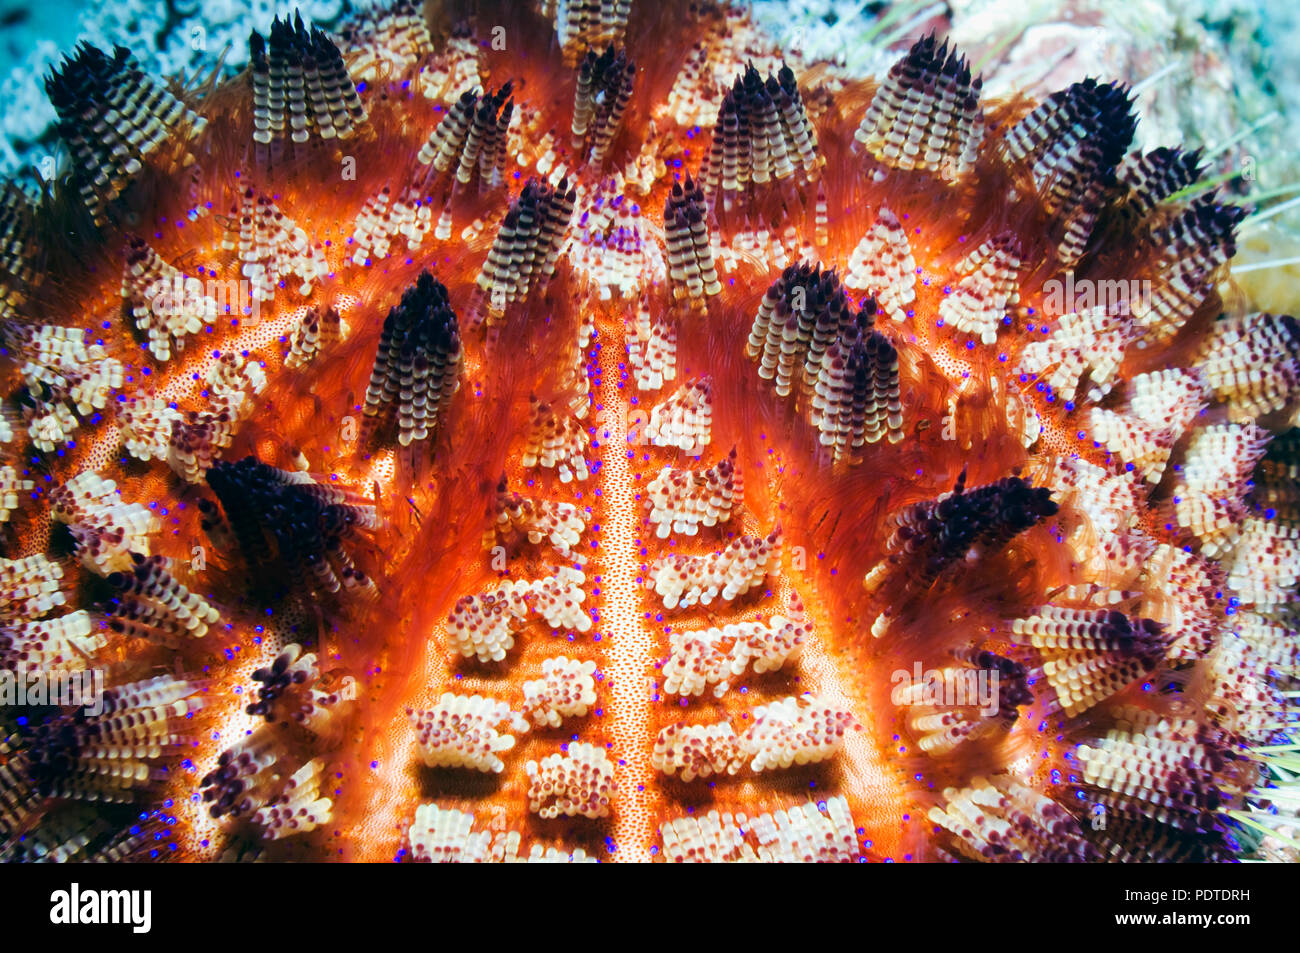 Fire urchin (Asthenosoma ijimai).  This sea urchin has venomous spines and is able to inflict painful stings.  Komodo National Park, Indonesia.  (Digi Stock Photo